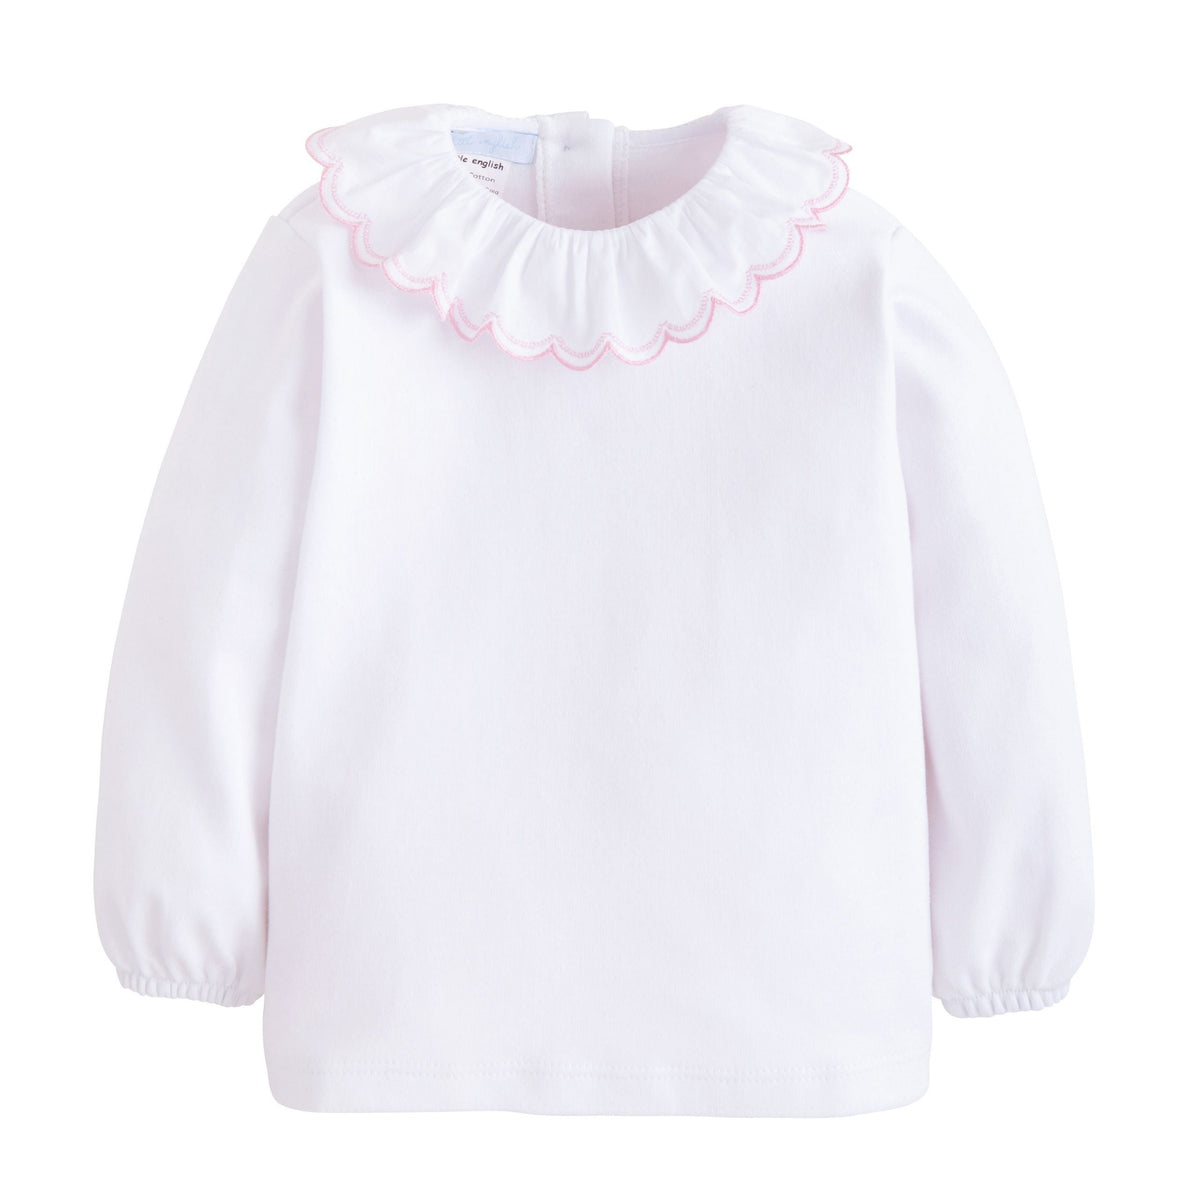 seguridadindustrialcr classic chidlrens clothing girls white long sleeve blouse with white and pink ruffled collar